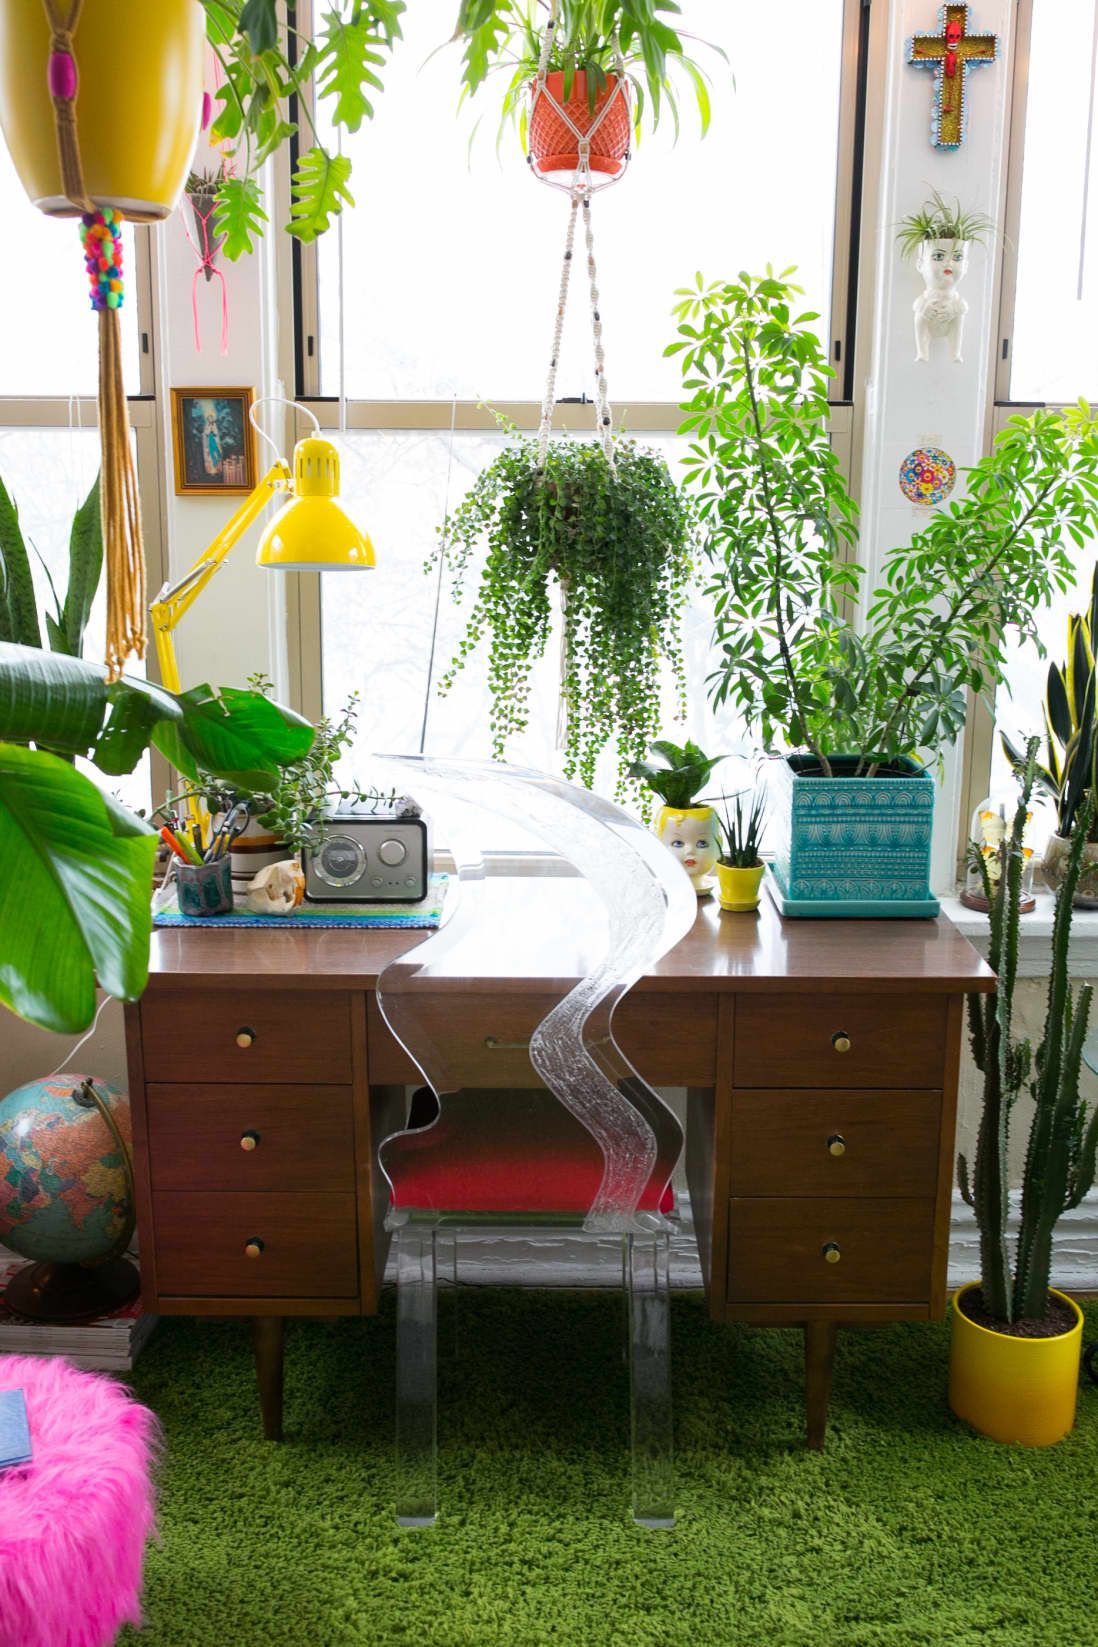 These 6 Perfect Hanging Plants Are Also Pretty Easy to Care For -   17 planting Indoor desk ideas